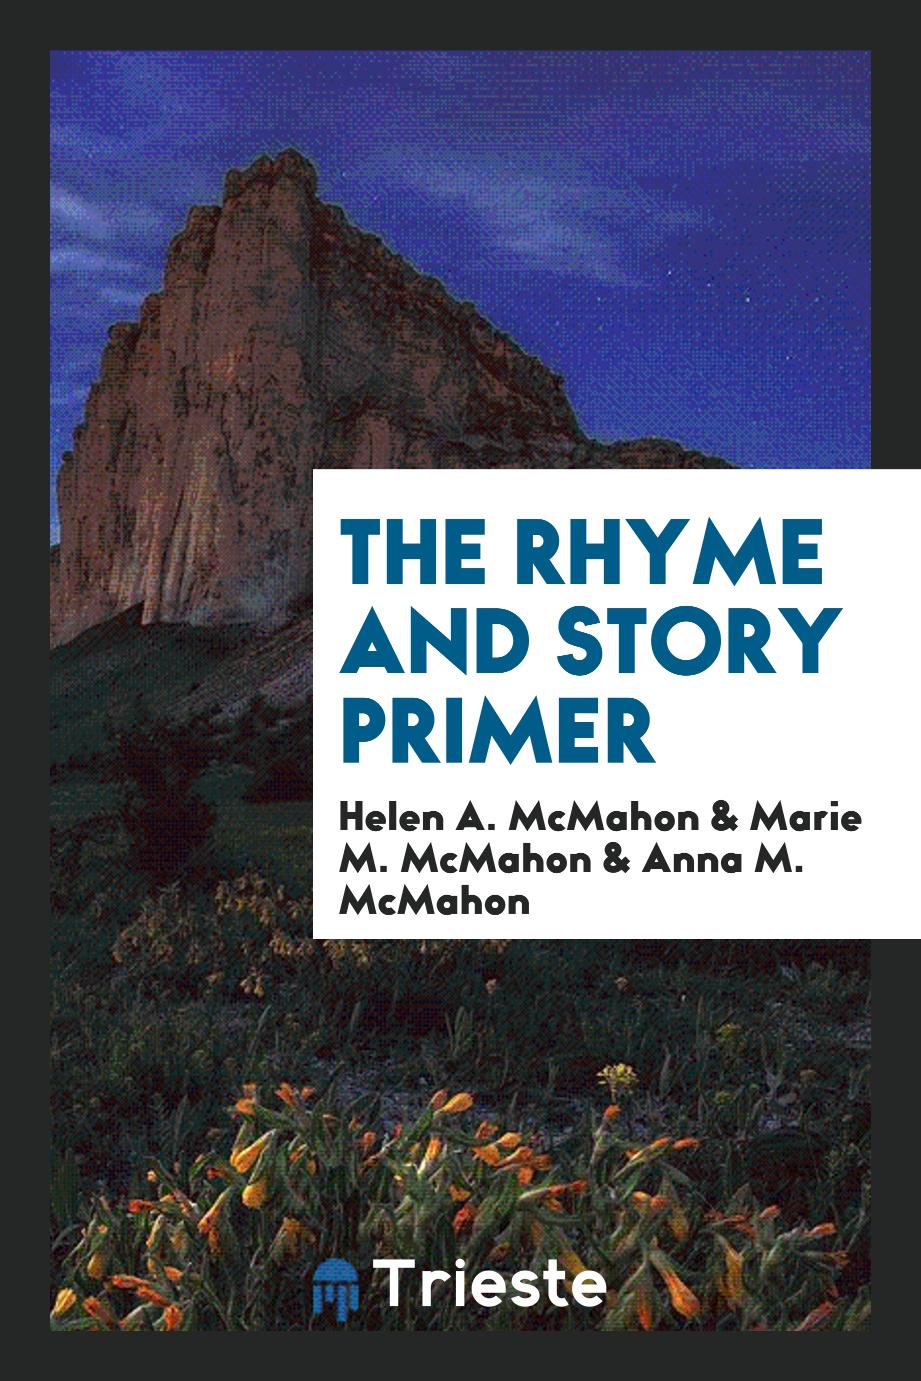 The Rhyme and Story Primer